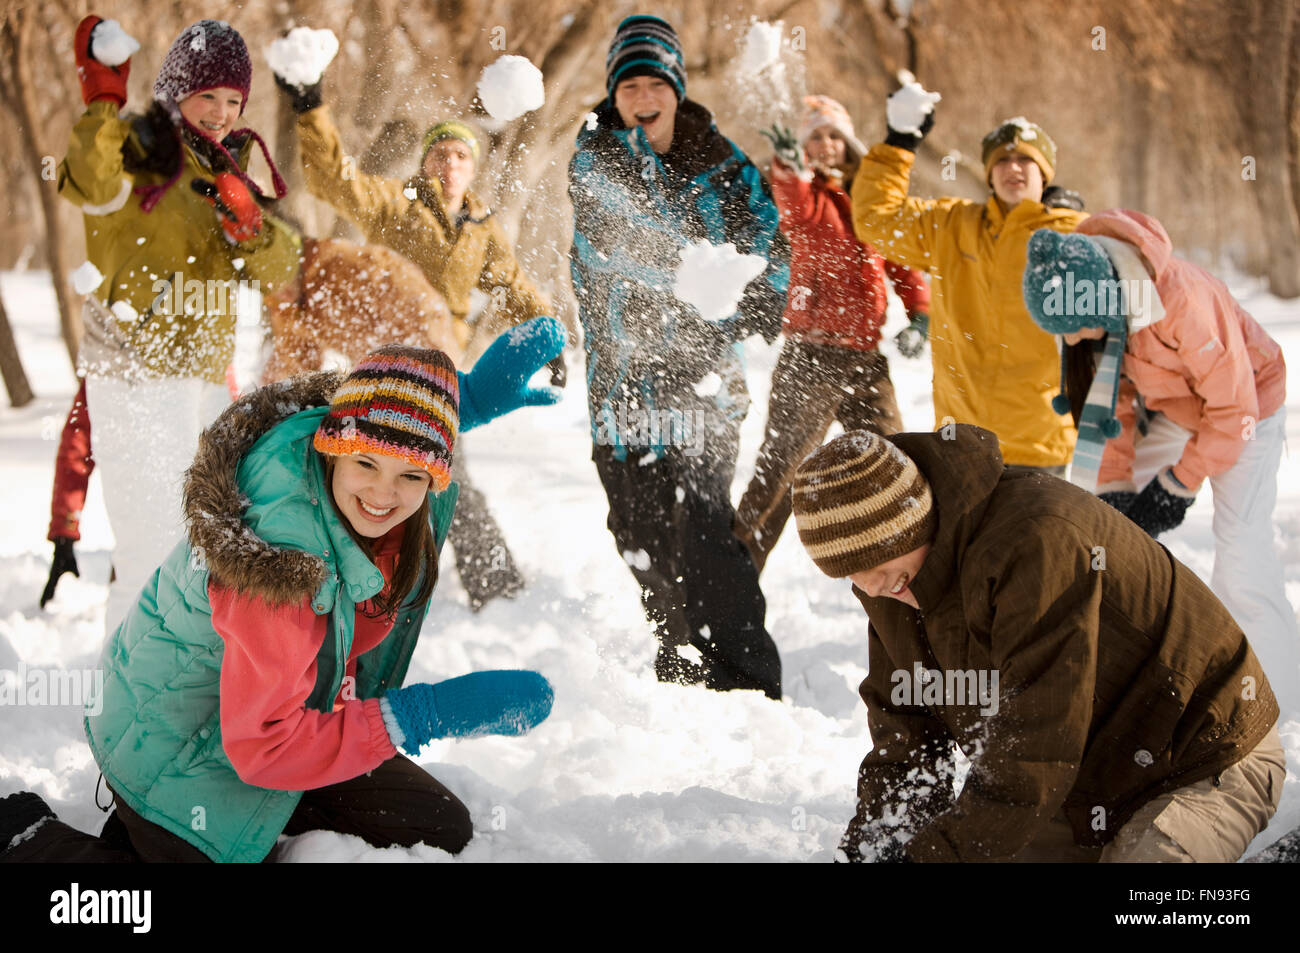 A group of young people, boys and girls having a snowball fight. Stock Photo